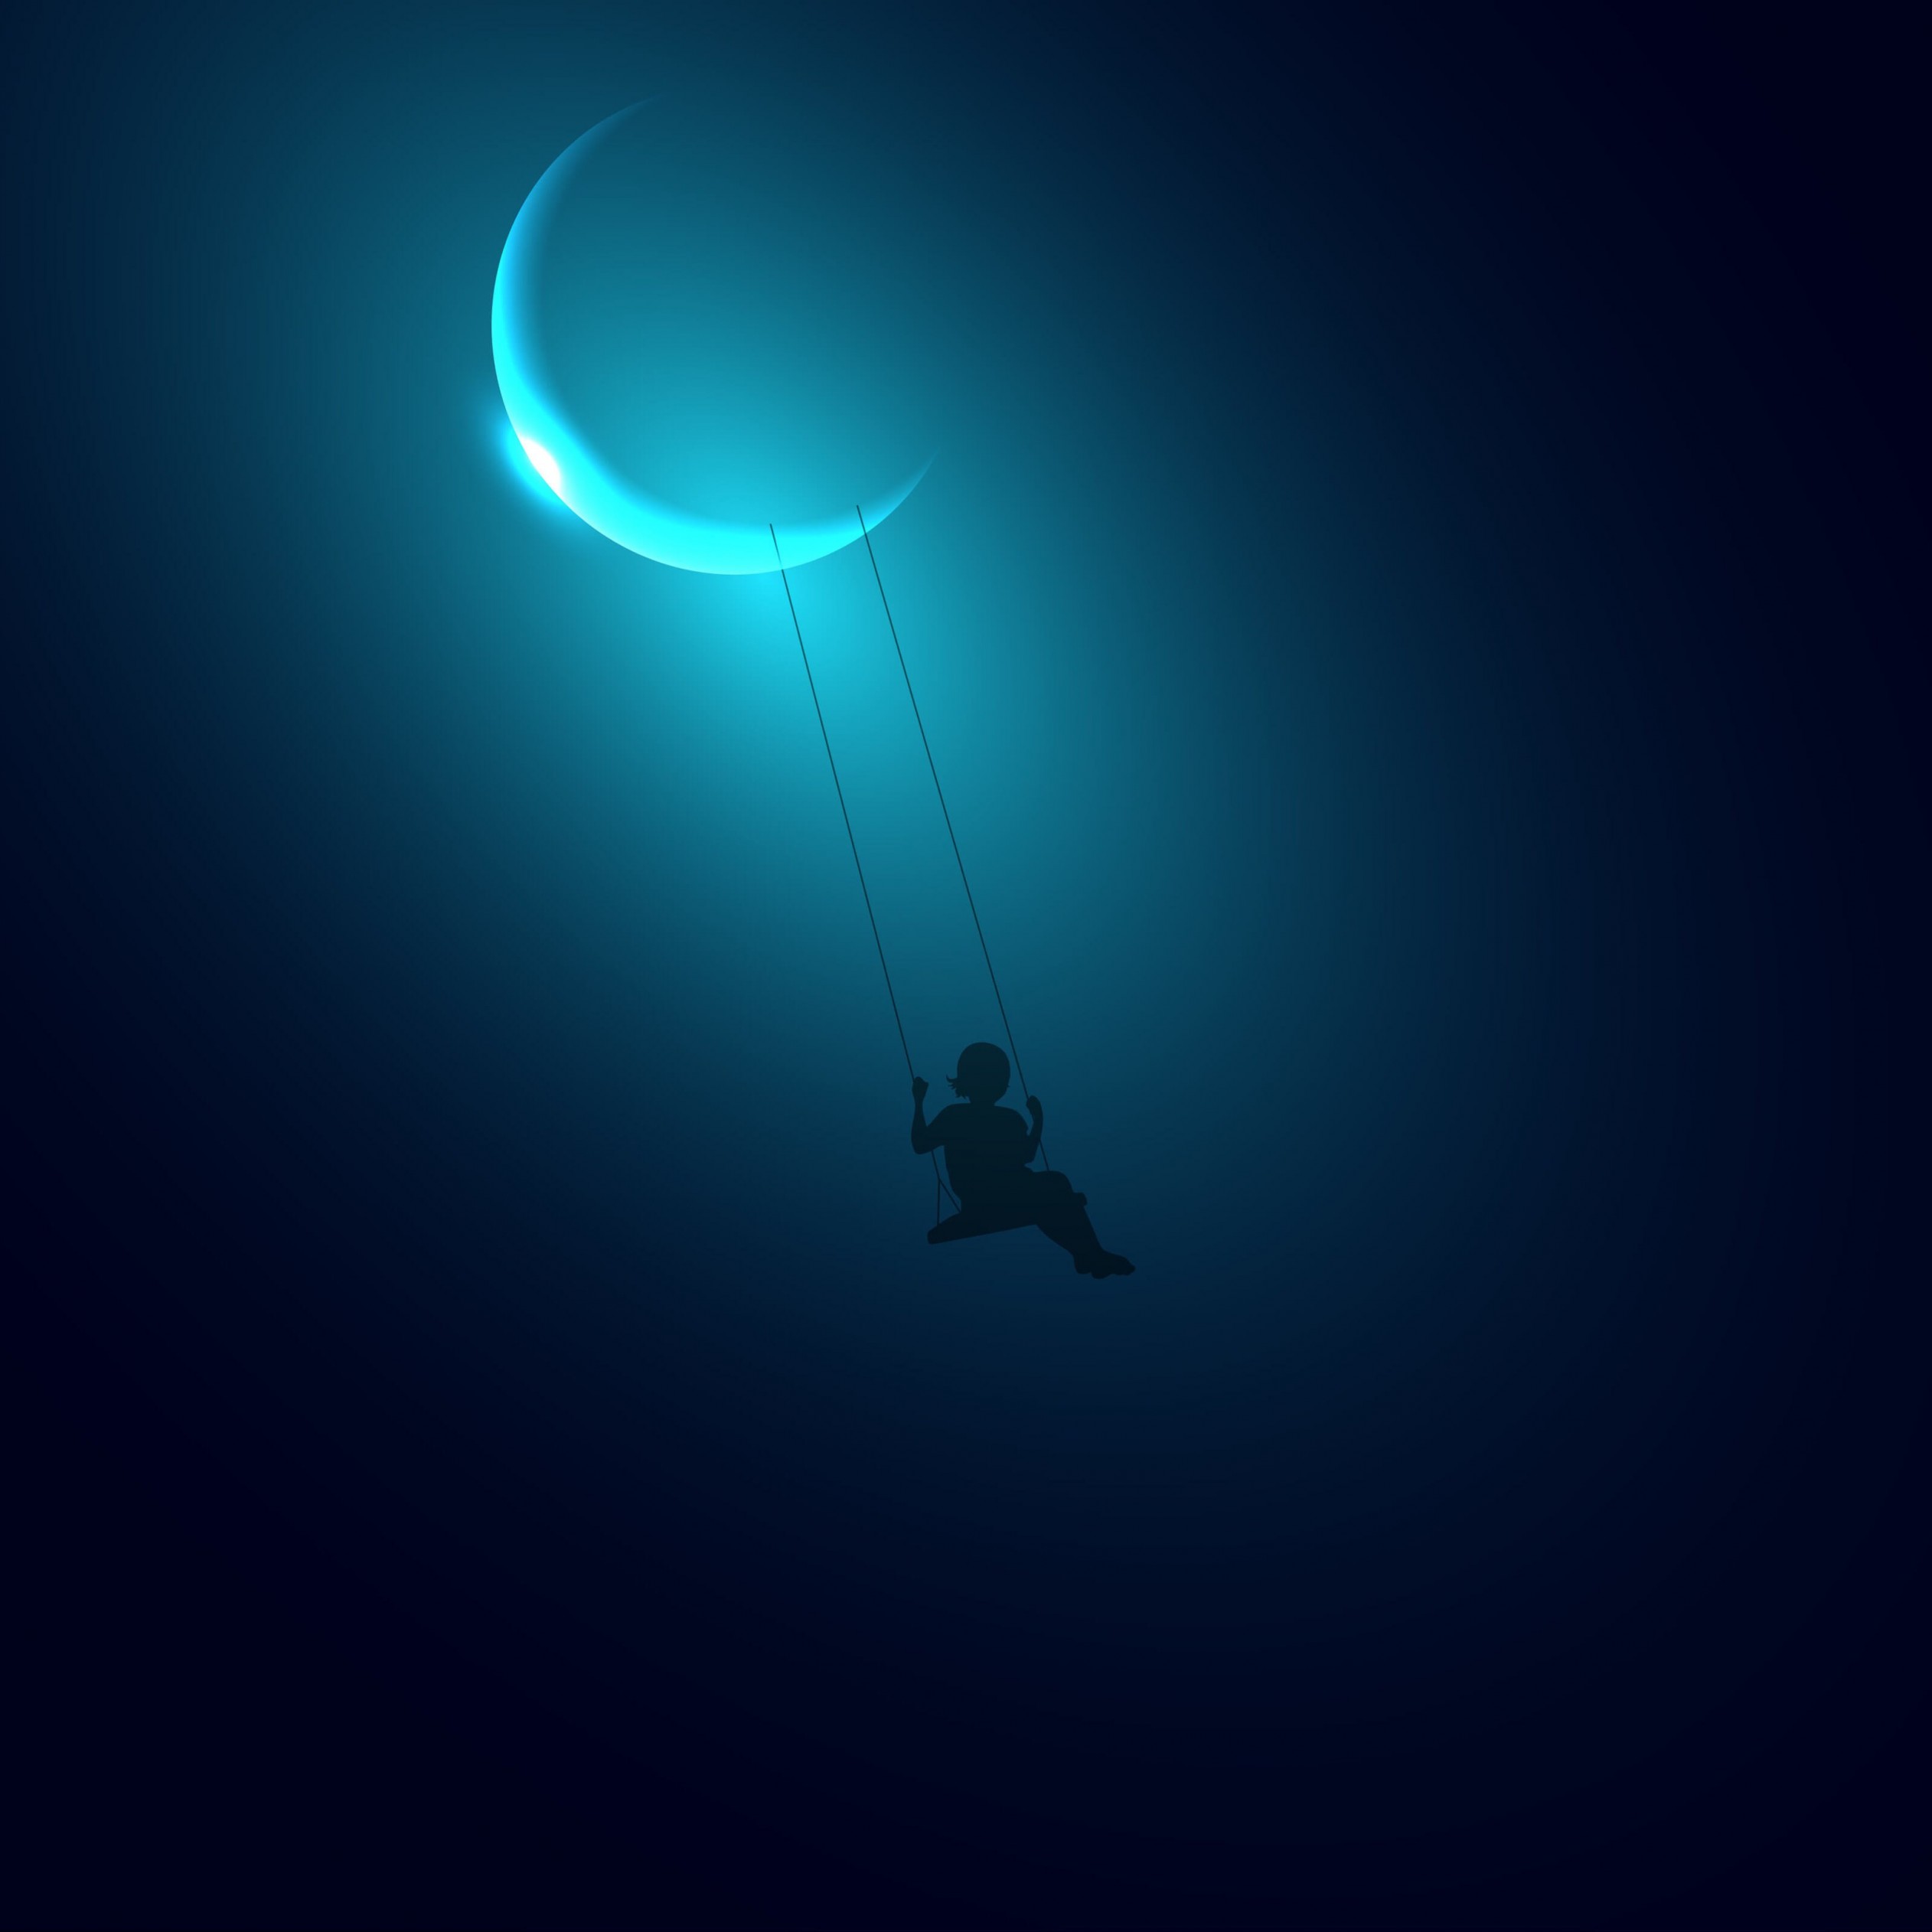 Little Girl Swinging on the Moon Wallpaper for Apple iPad Air